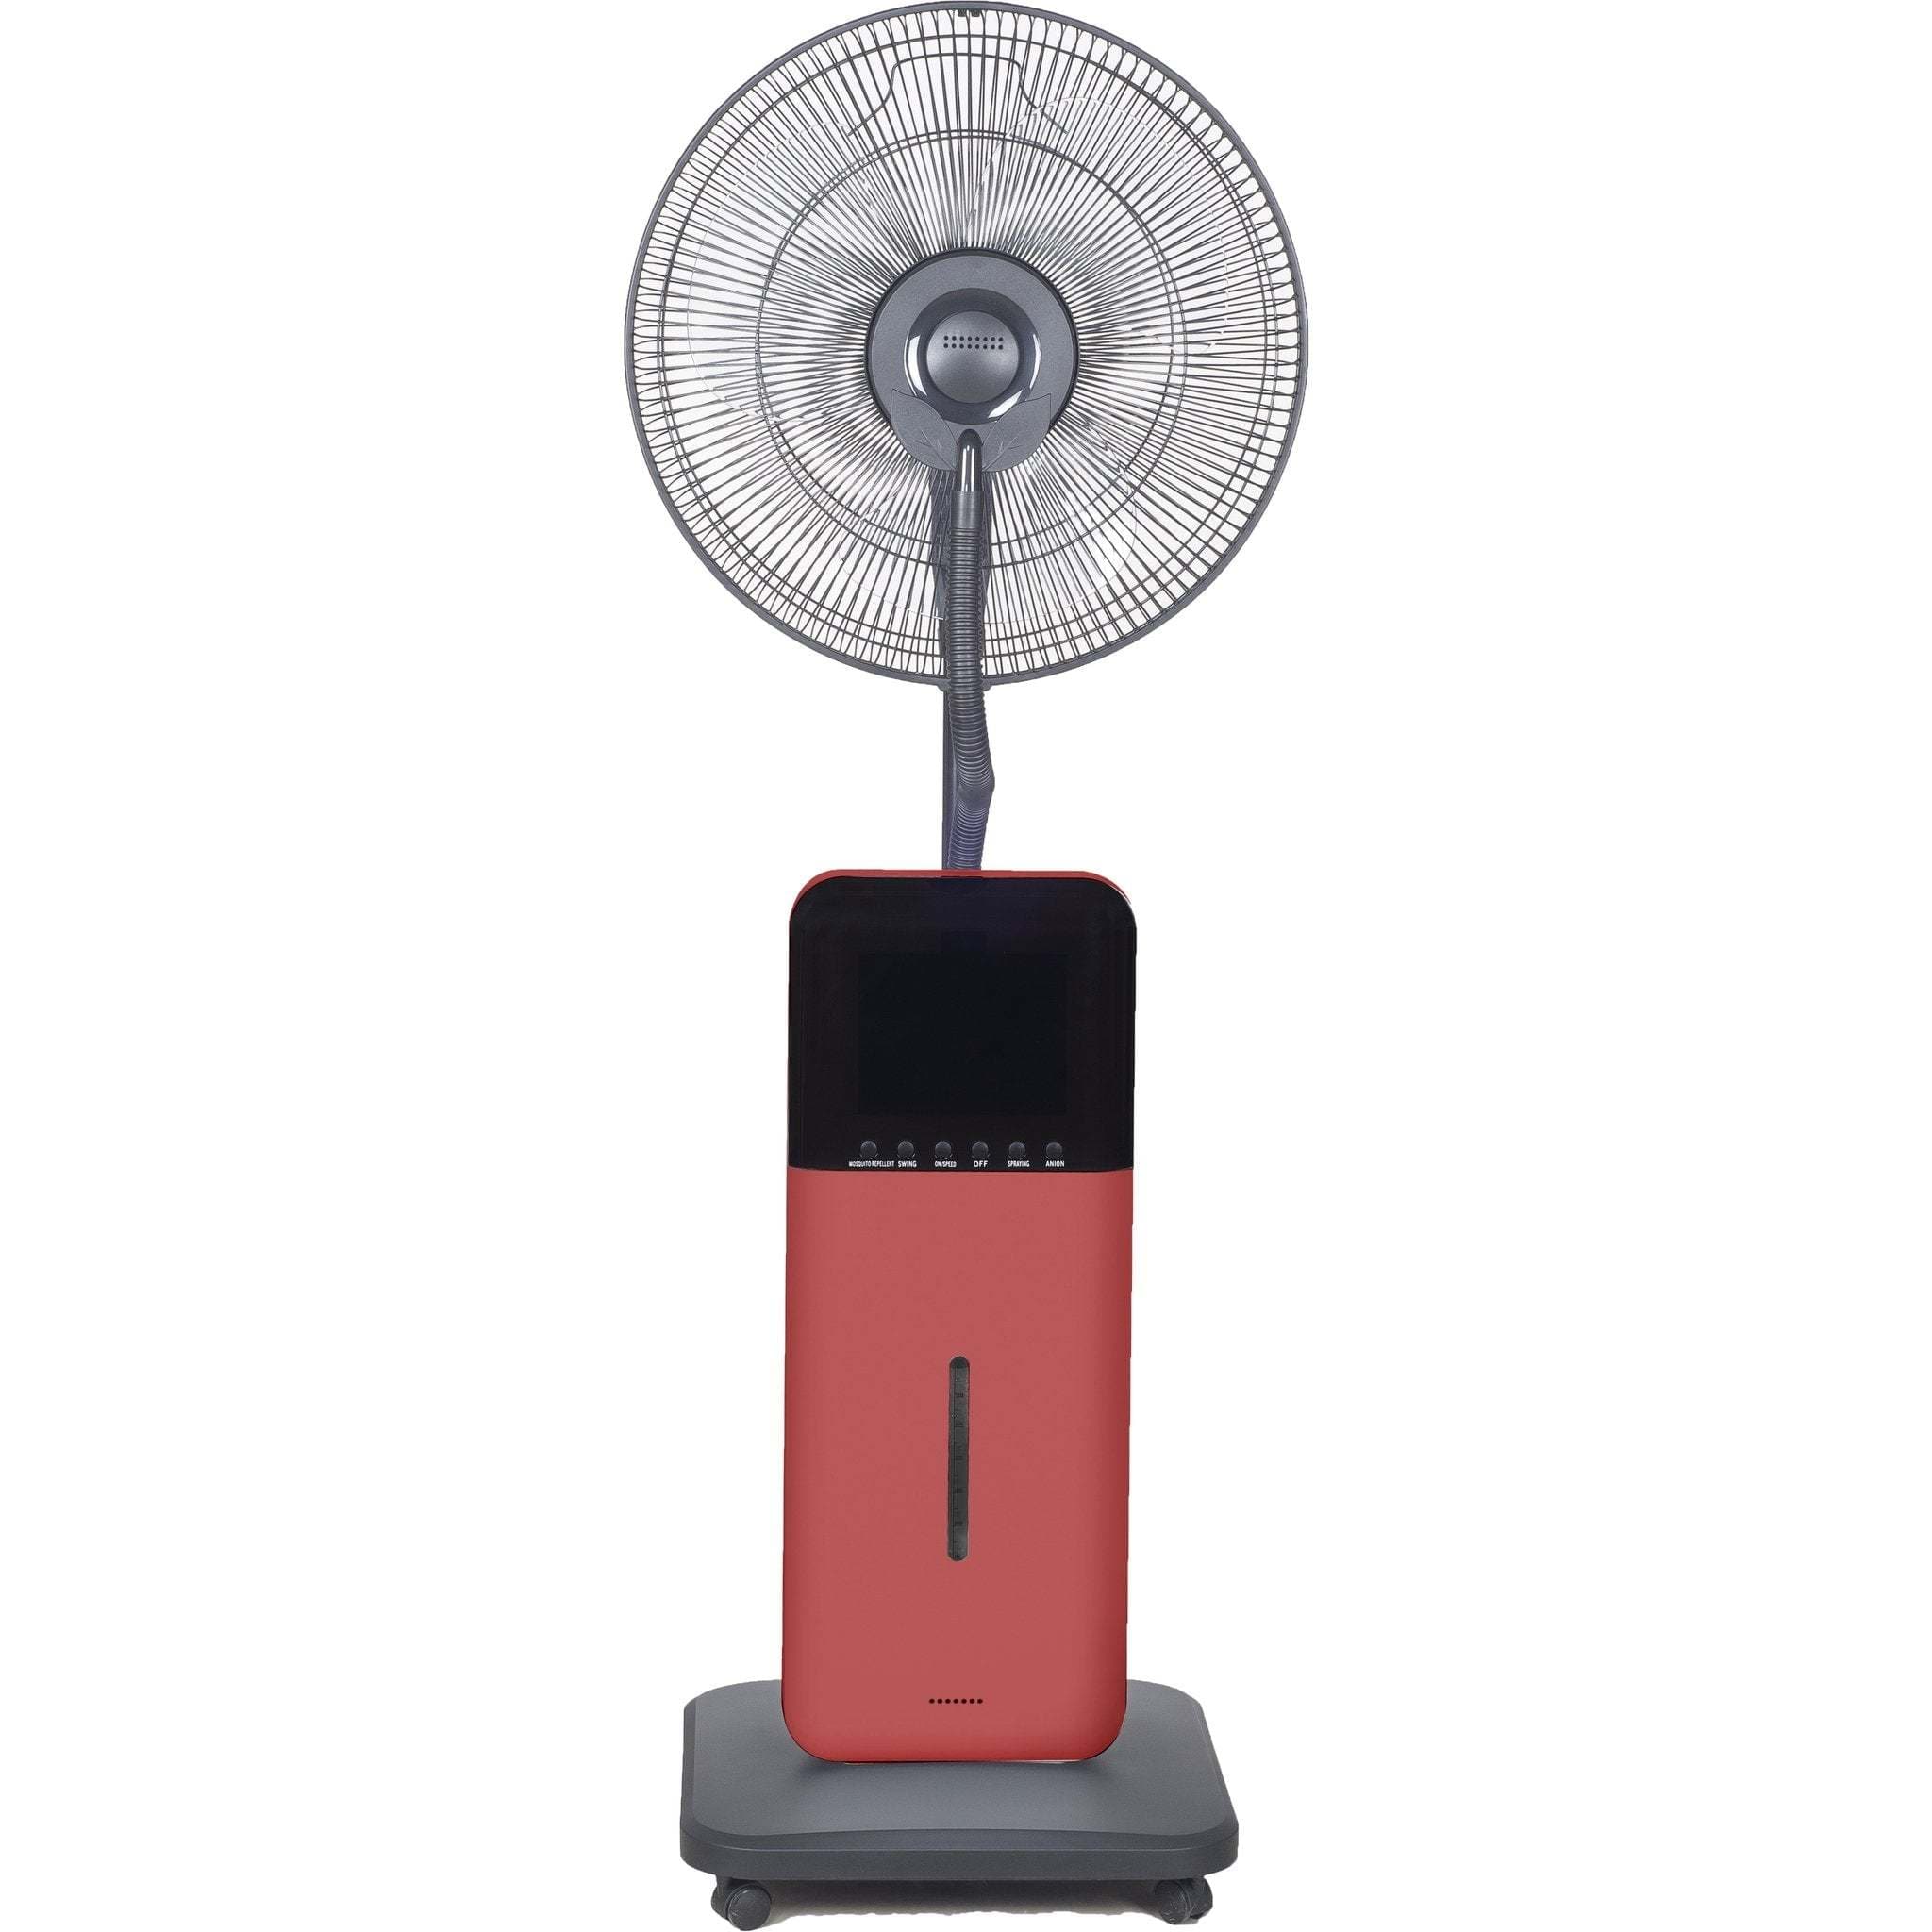 CoolZone Ultrasonic Dry Misting Fan with Bluetooth Technology - Image 1